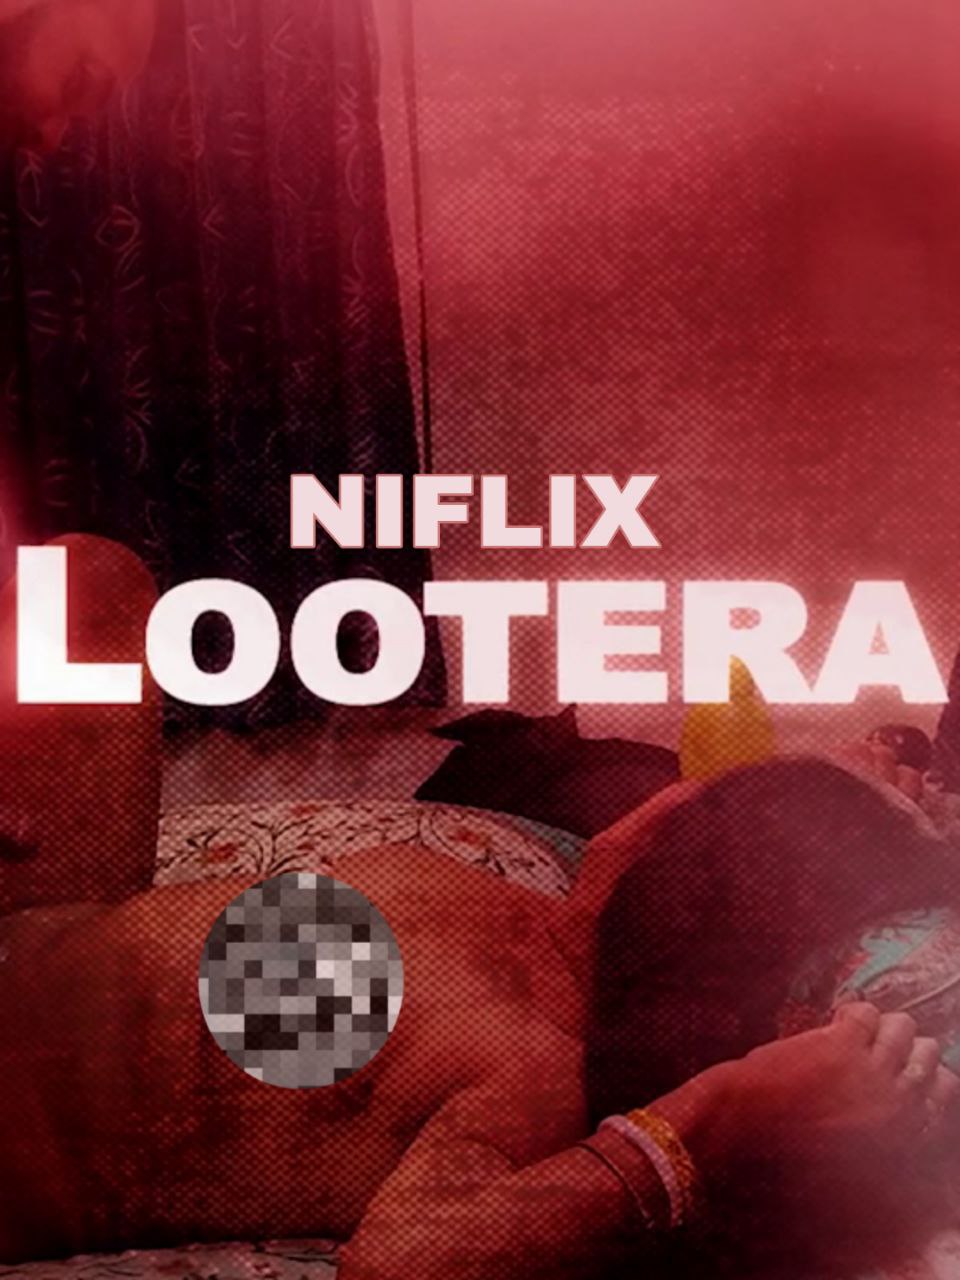 You are currently viewing Lootera Uncut 2022 Niflix Hot Short Film 720p 480p HDRip 260MB 72MB Download & Watch Online